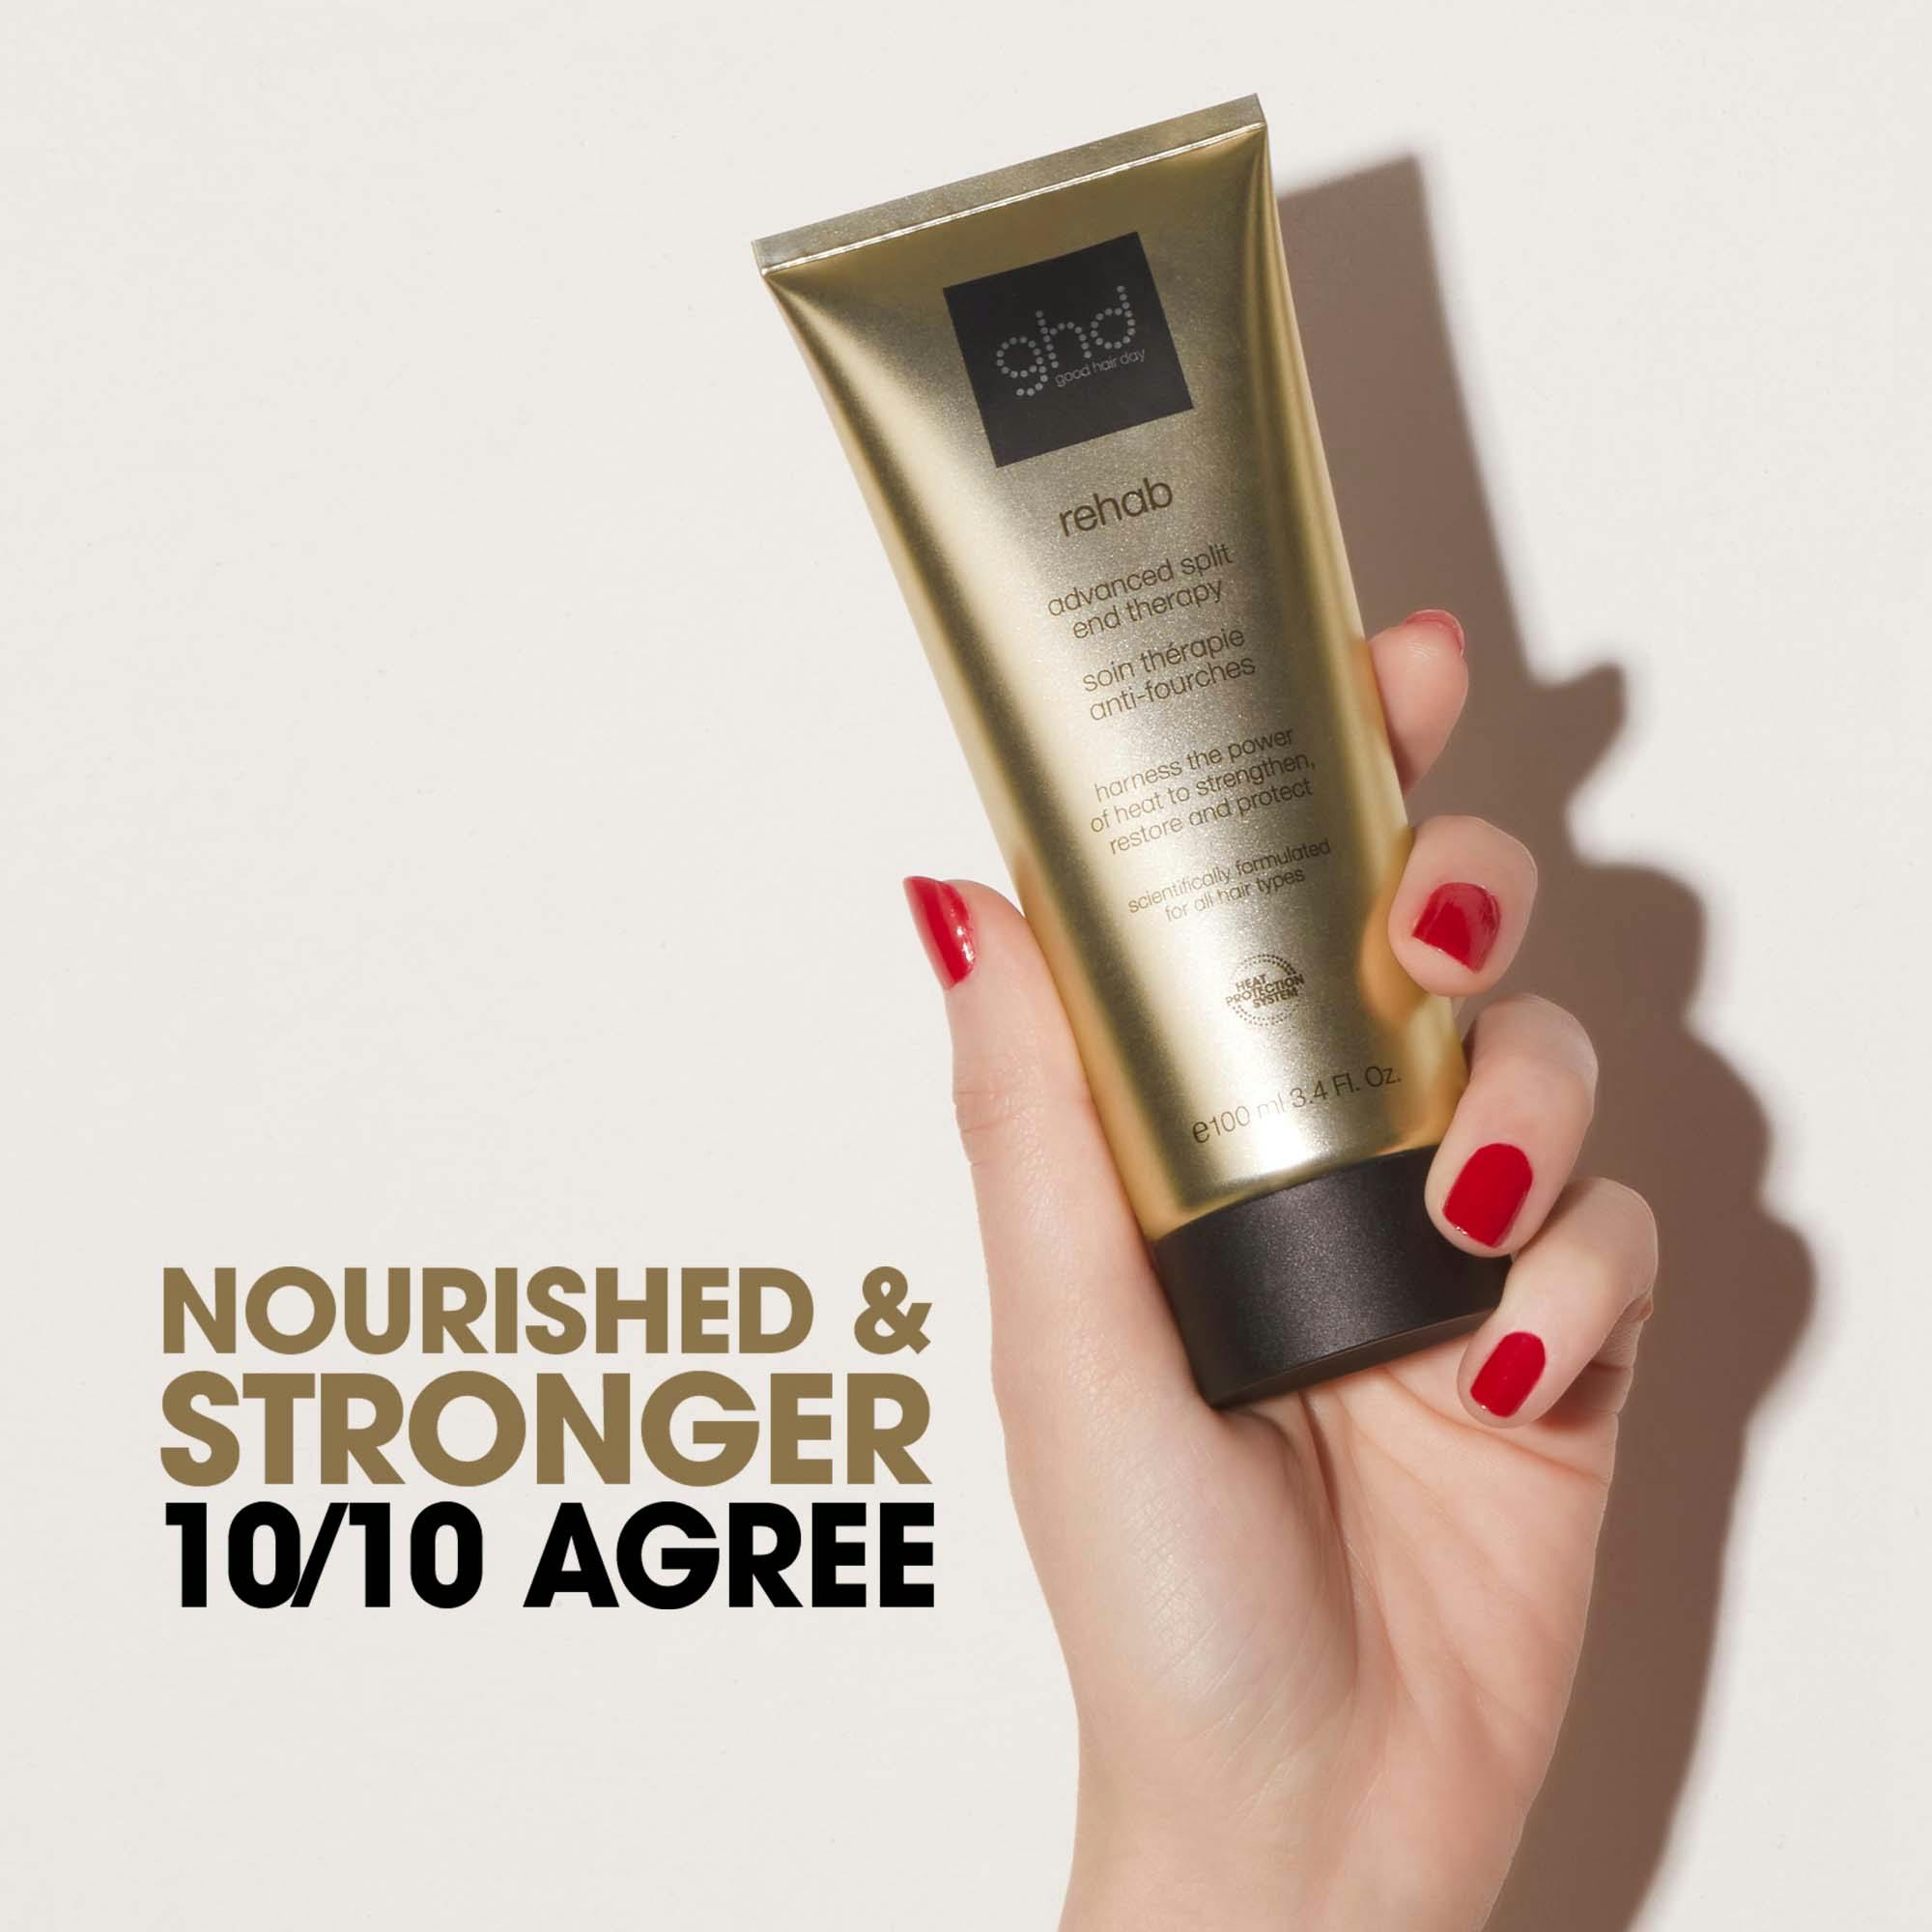 ghd Rehab Advanced Split End Therapy 100ml Heat Protection Treatment